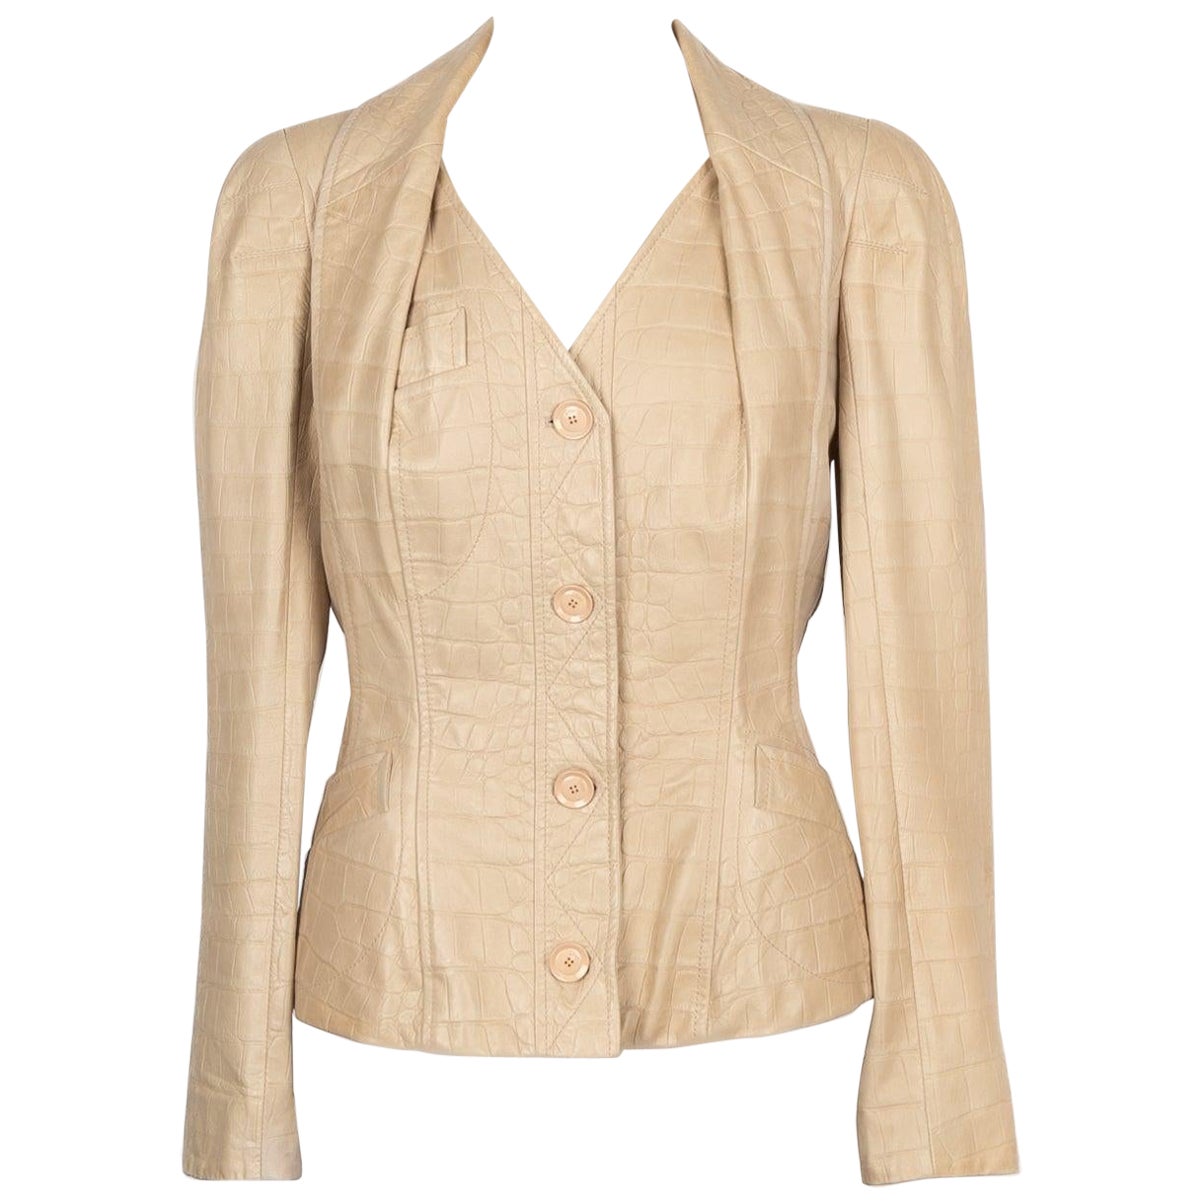 Dior Lamb Leather Jacket with Crocodile Print in Beige Tones, 2005 For Sale